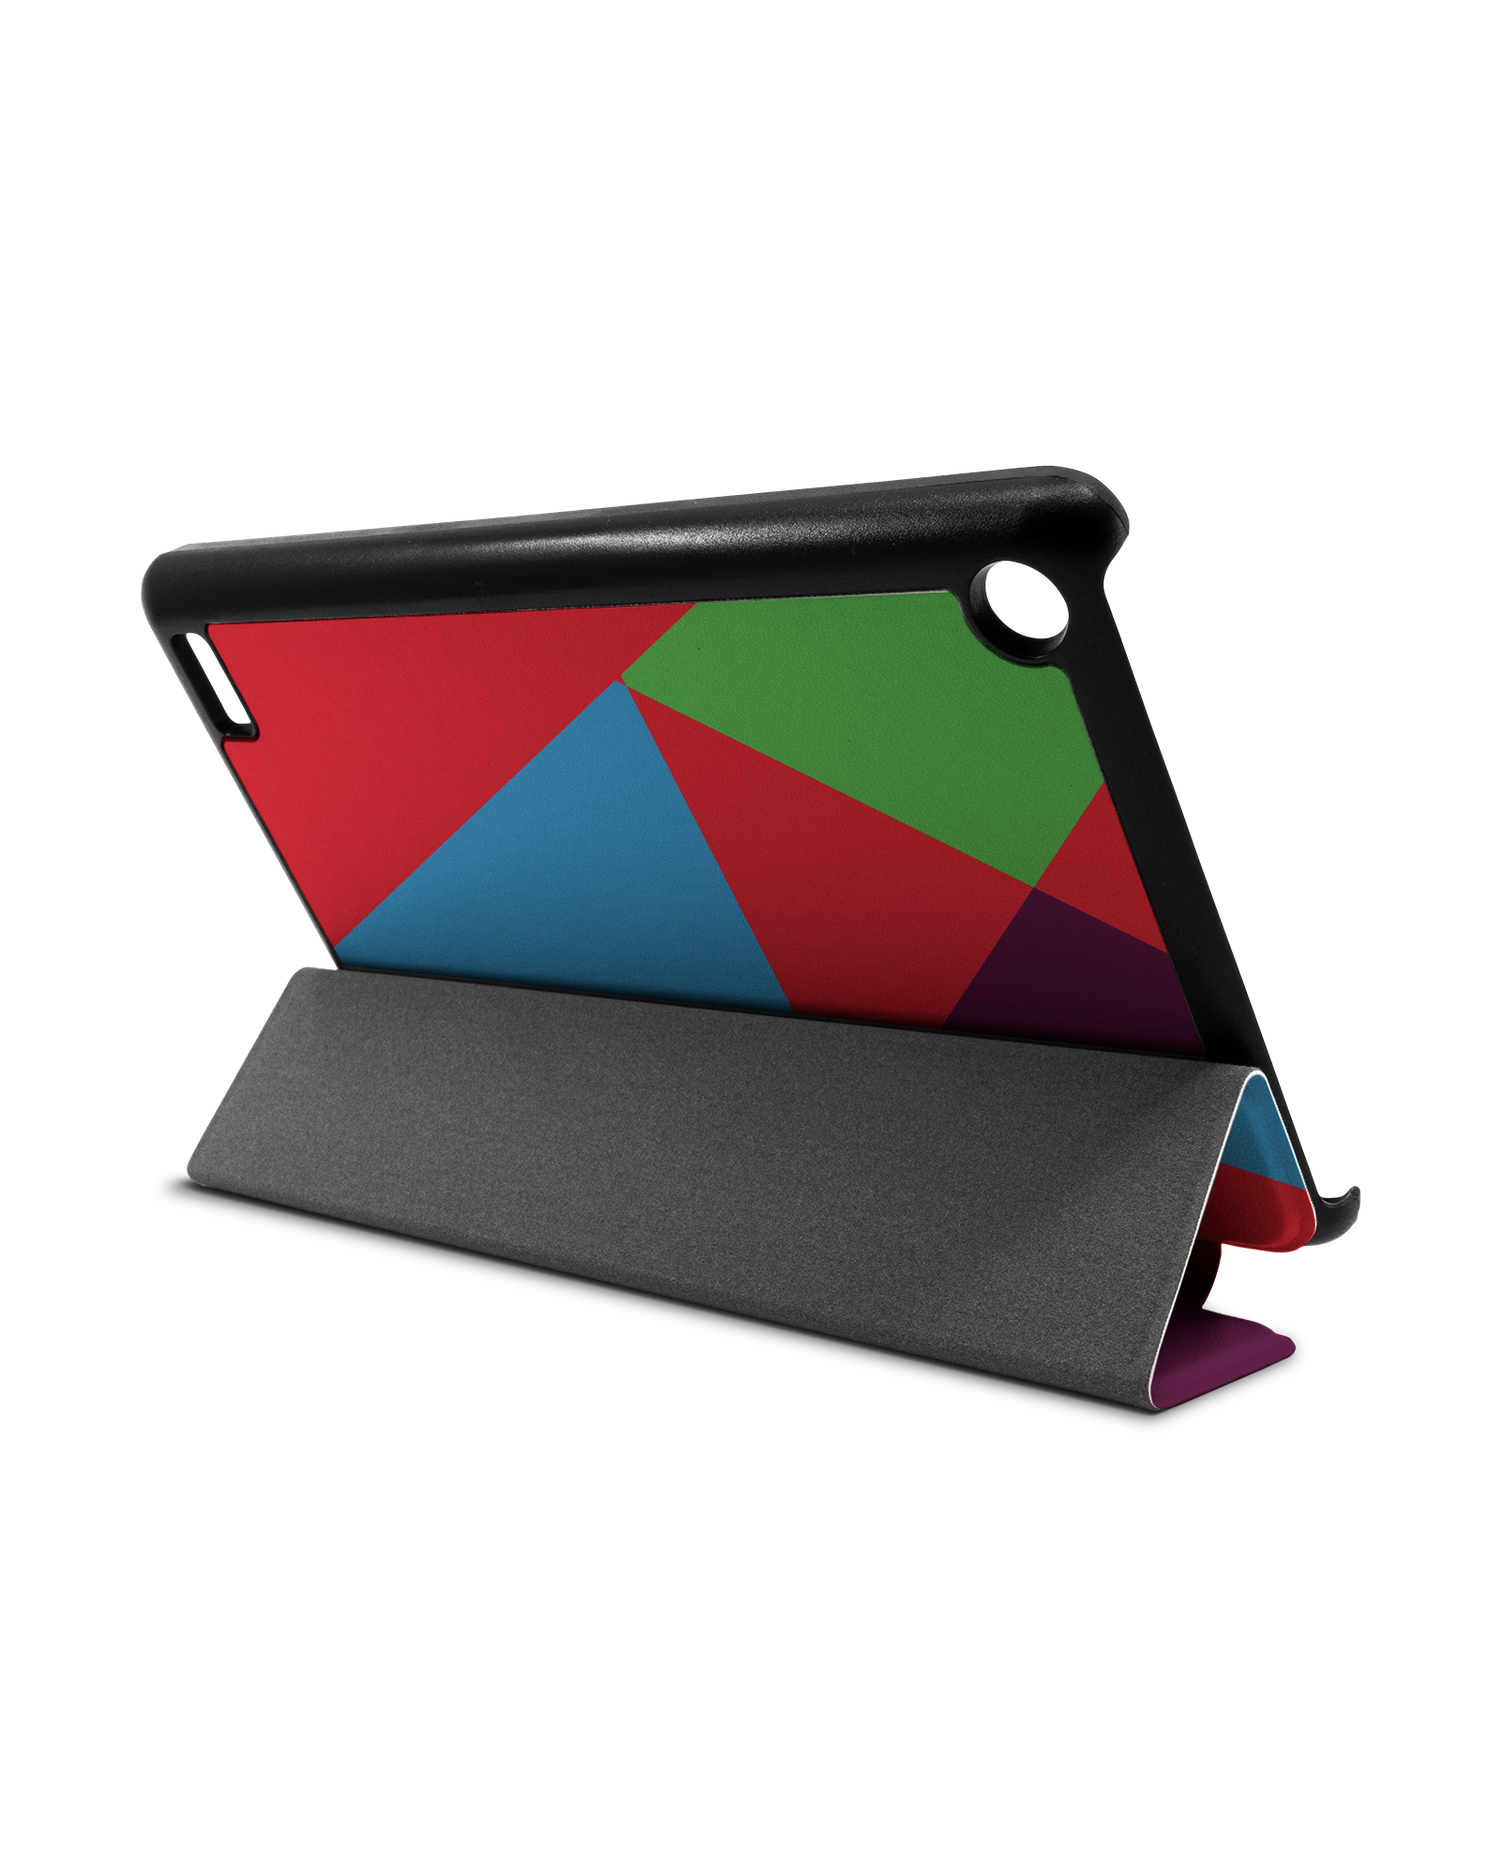 Pringles Abstract Tablet Smart Case for Amazon Fire 7: Used as Stand